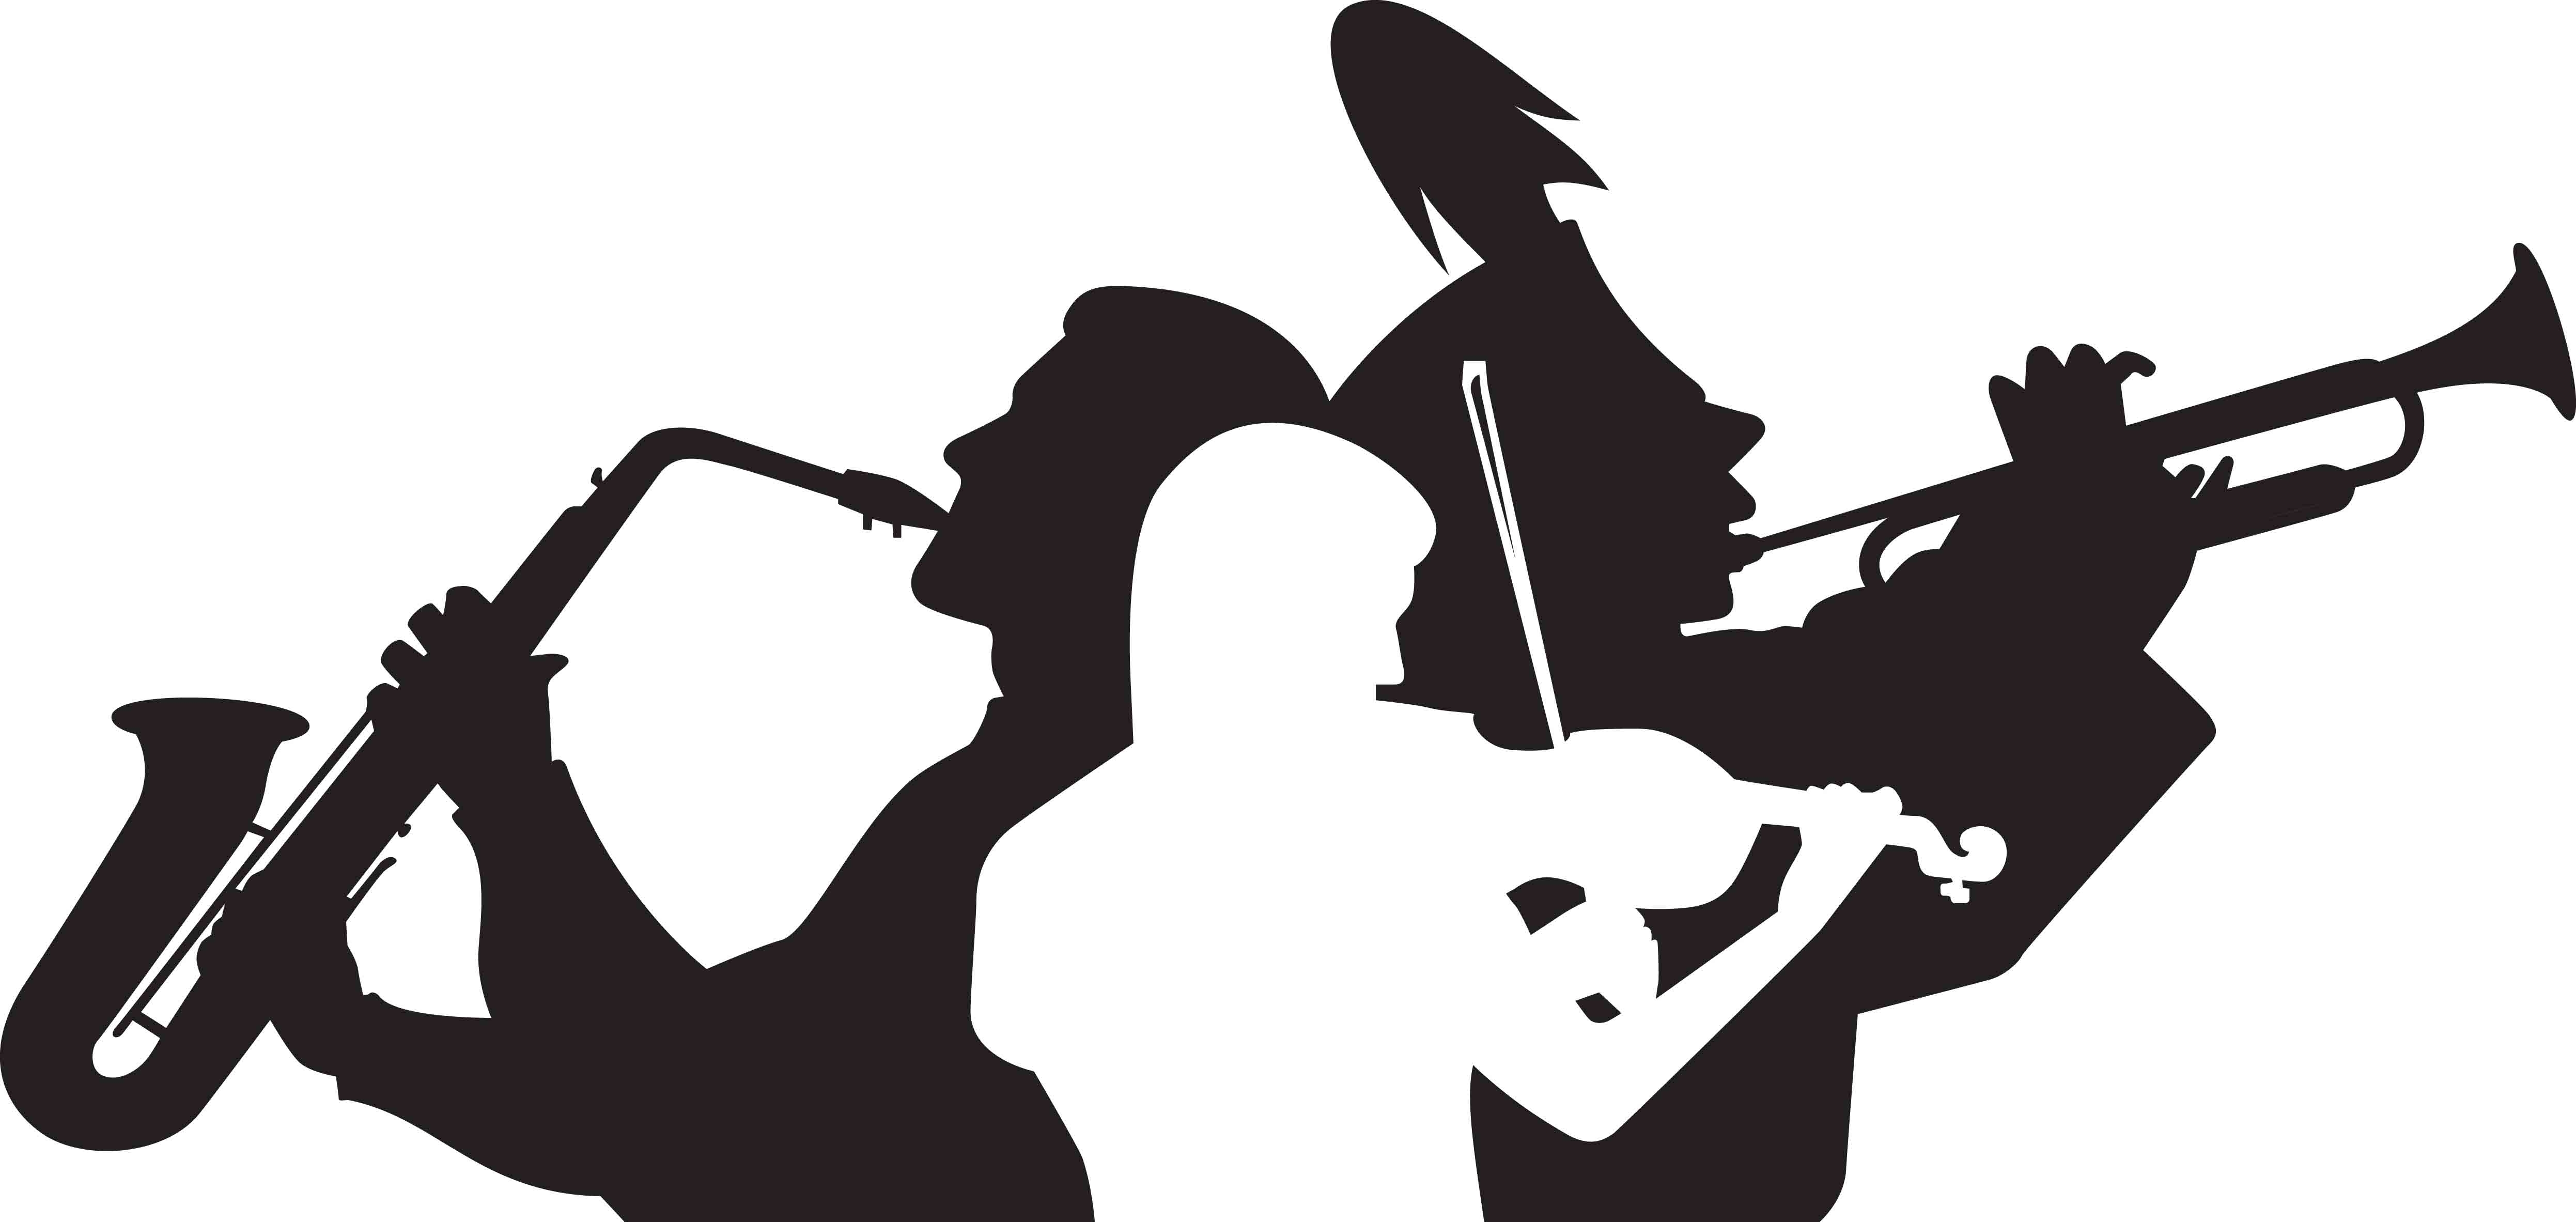 Marching Band Silhouette Clip Art